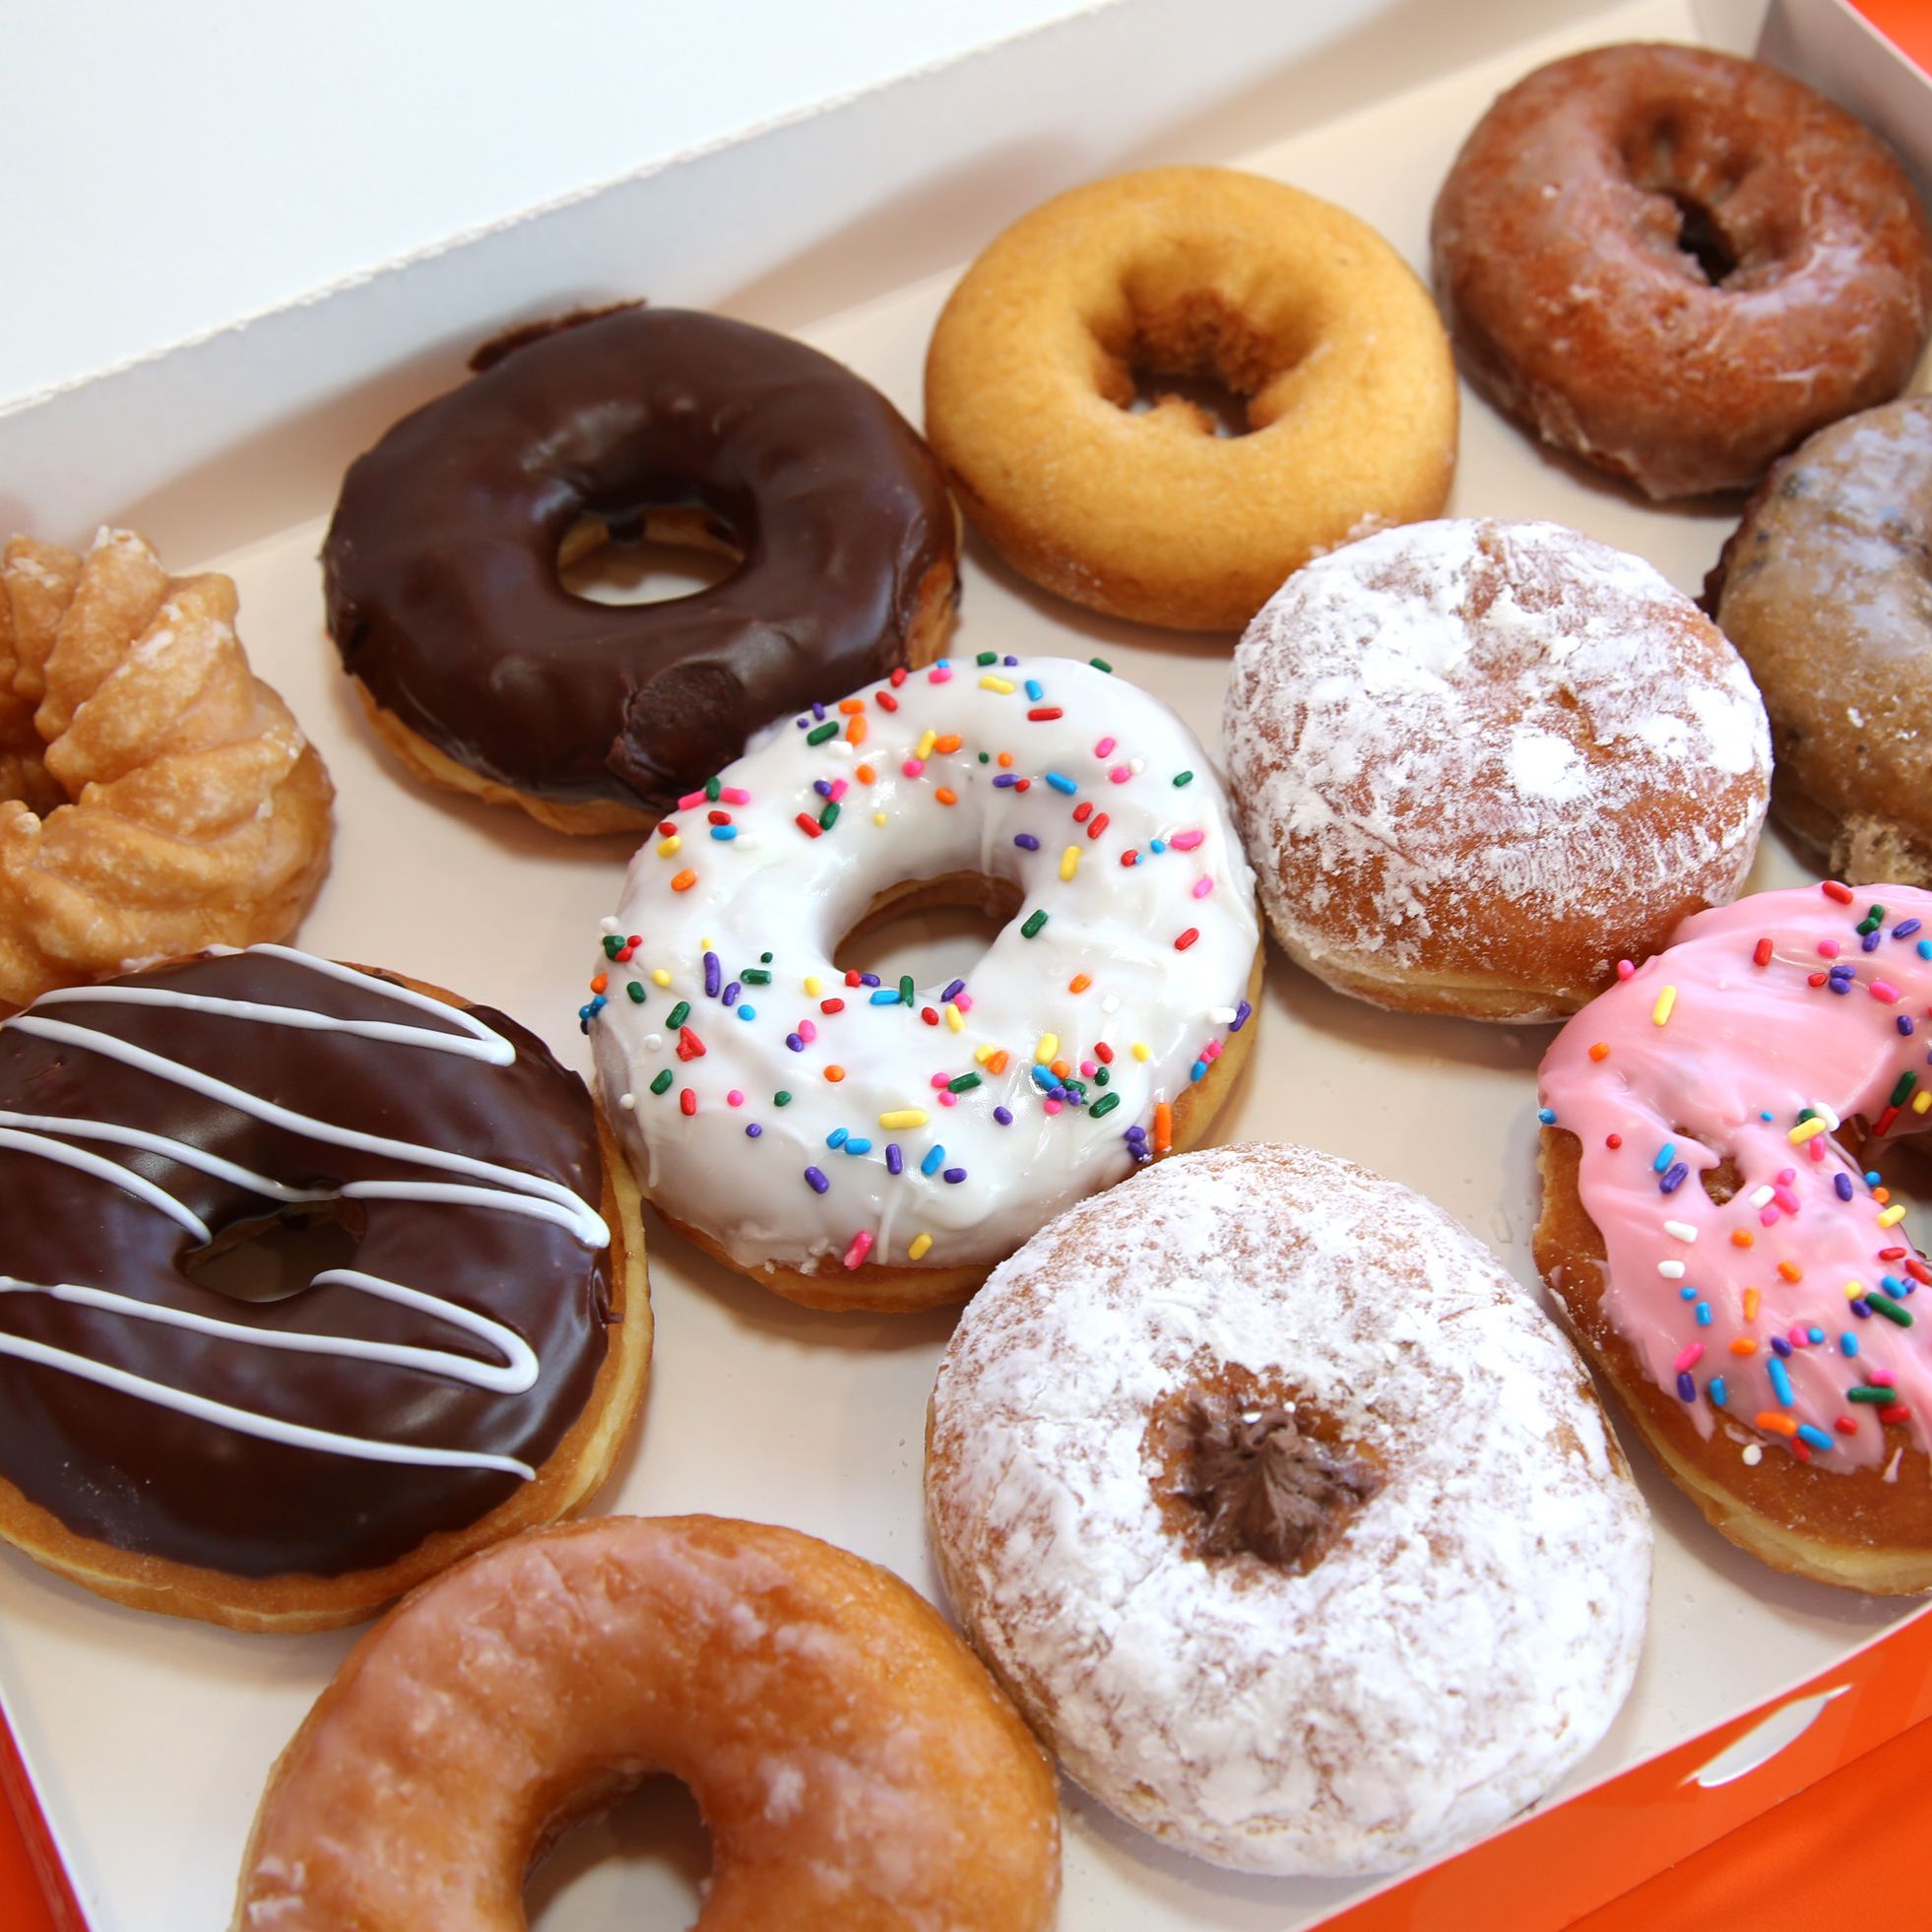 How to Get One of the Free Donuts Dunkin' Is Giving Away This Weekend